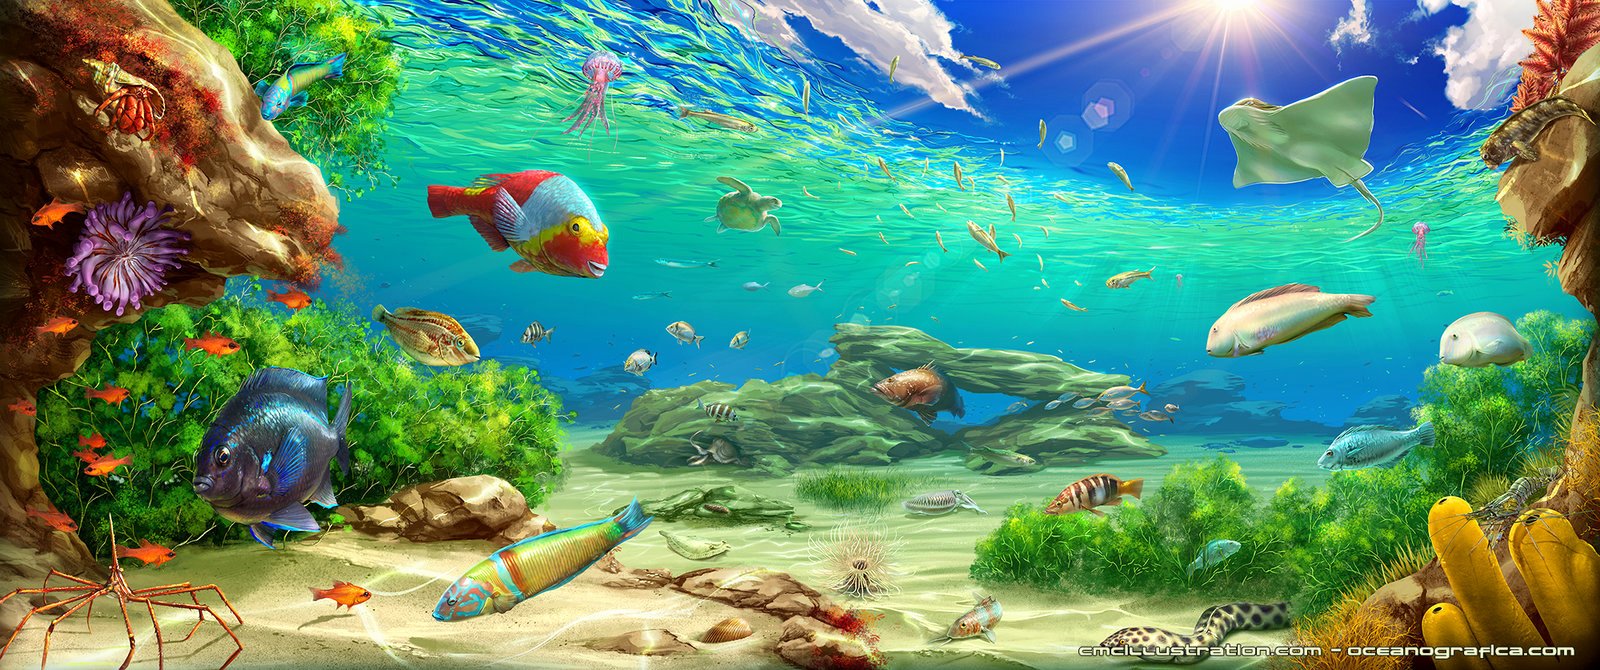 Paintings Of Fish Underwater Awesome Underwater Painting by Aioras On Deviantart